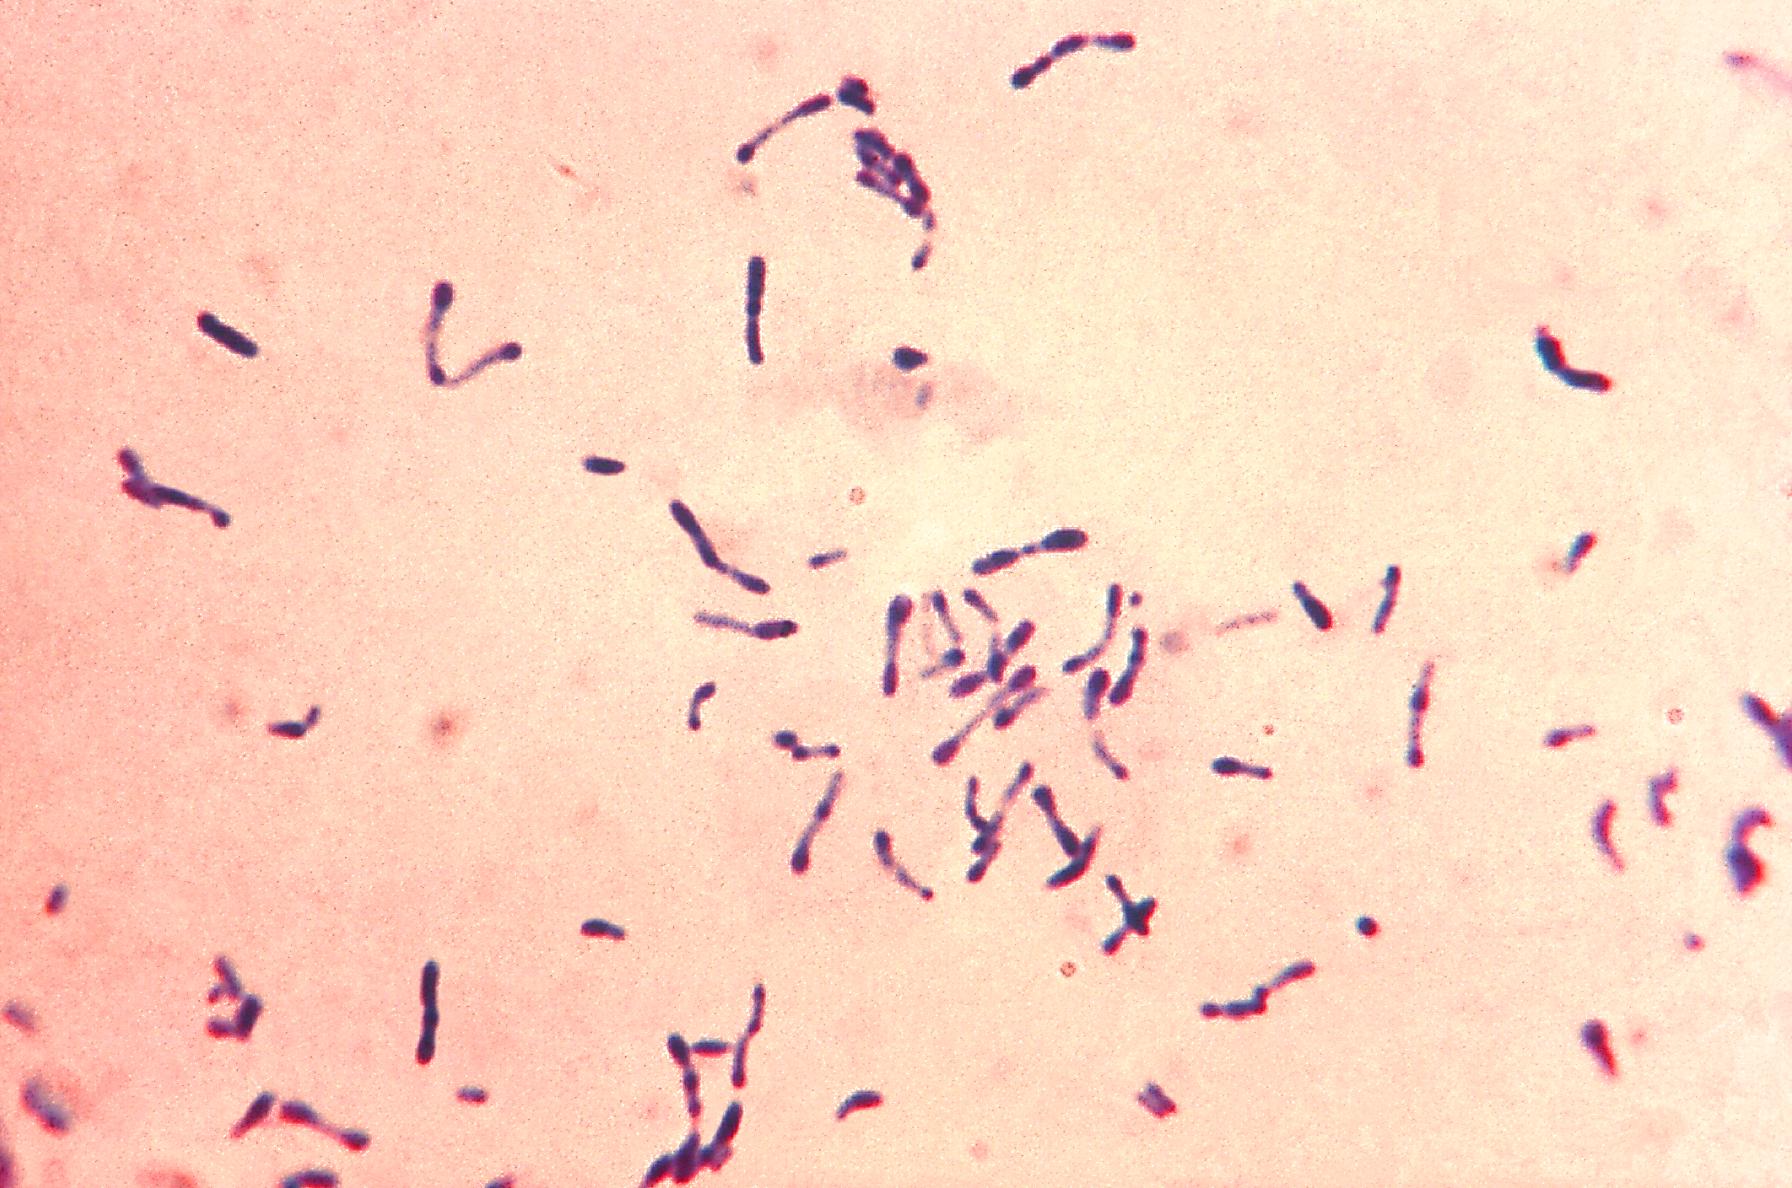 Gram stained Corynebacterium diphtheriae culture